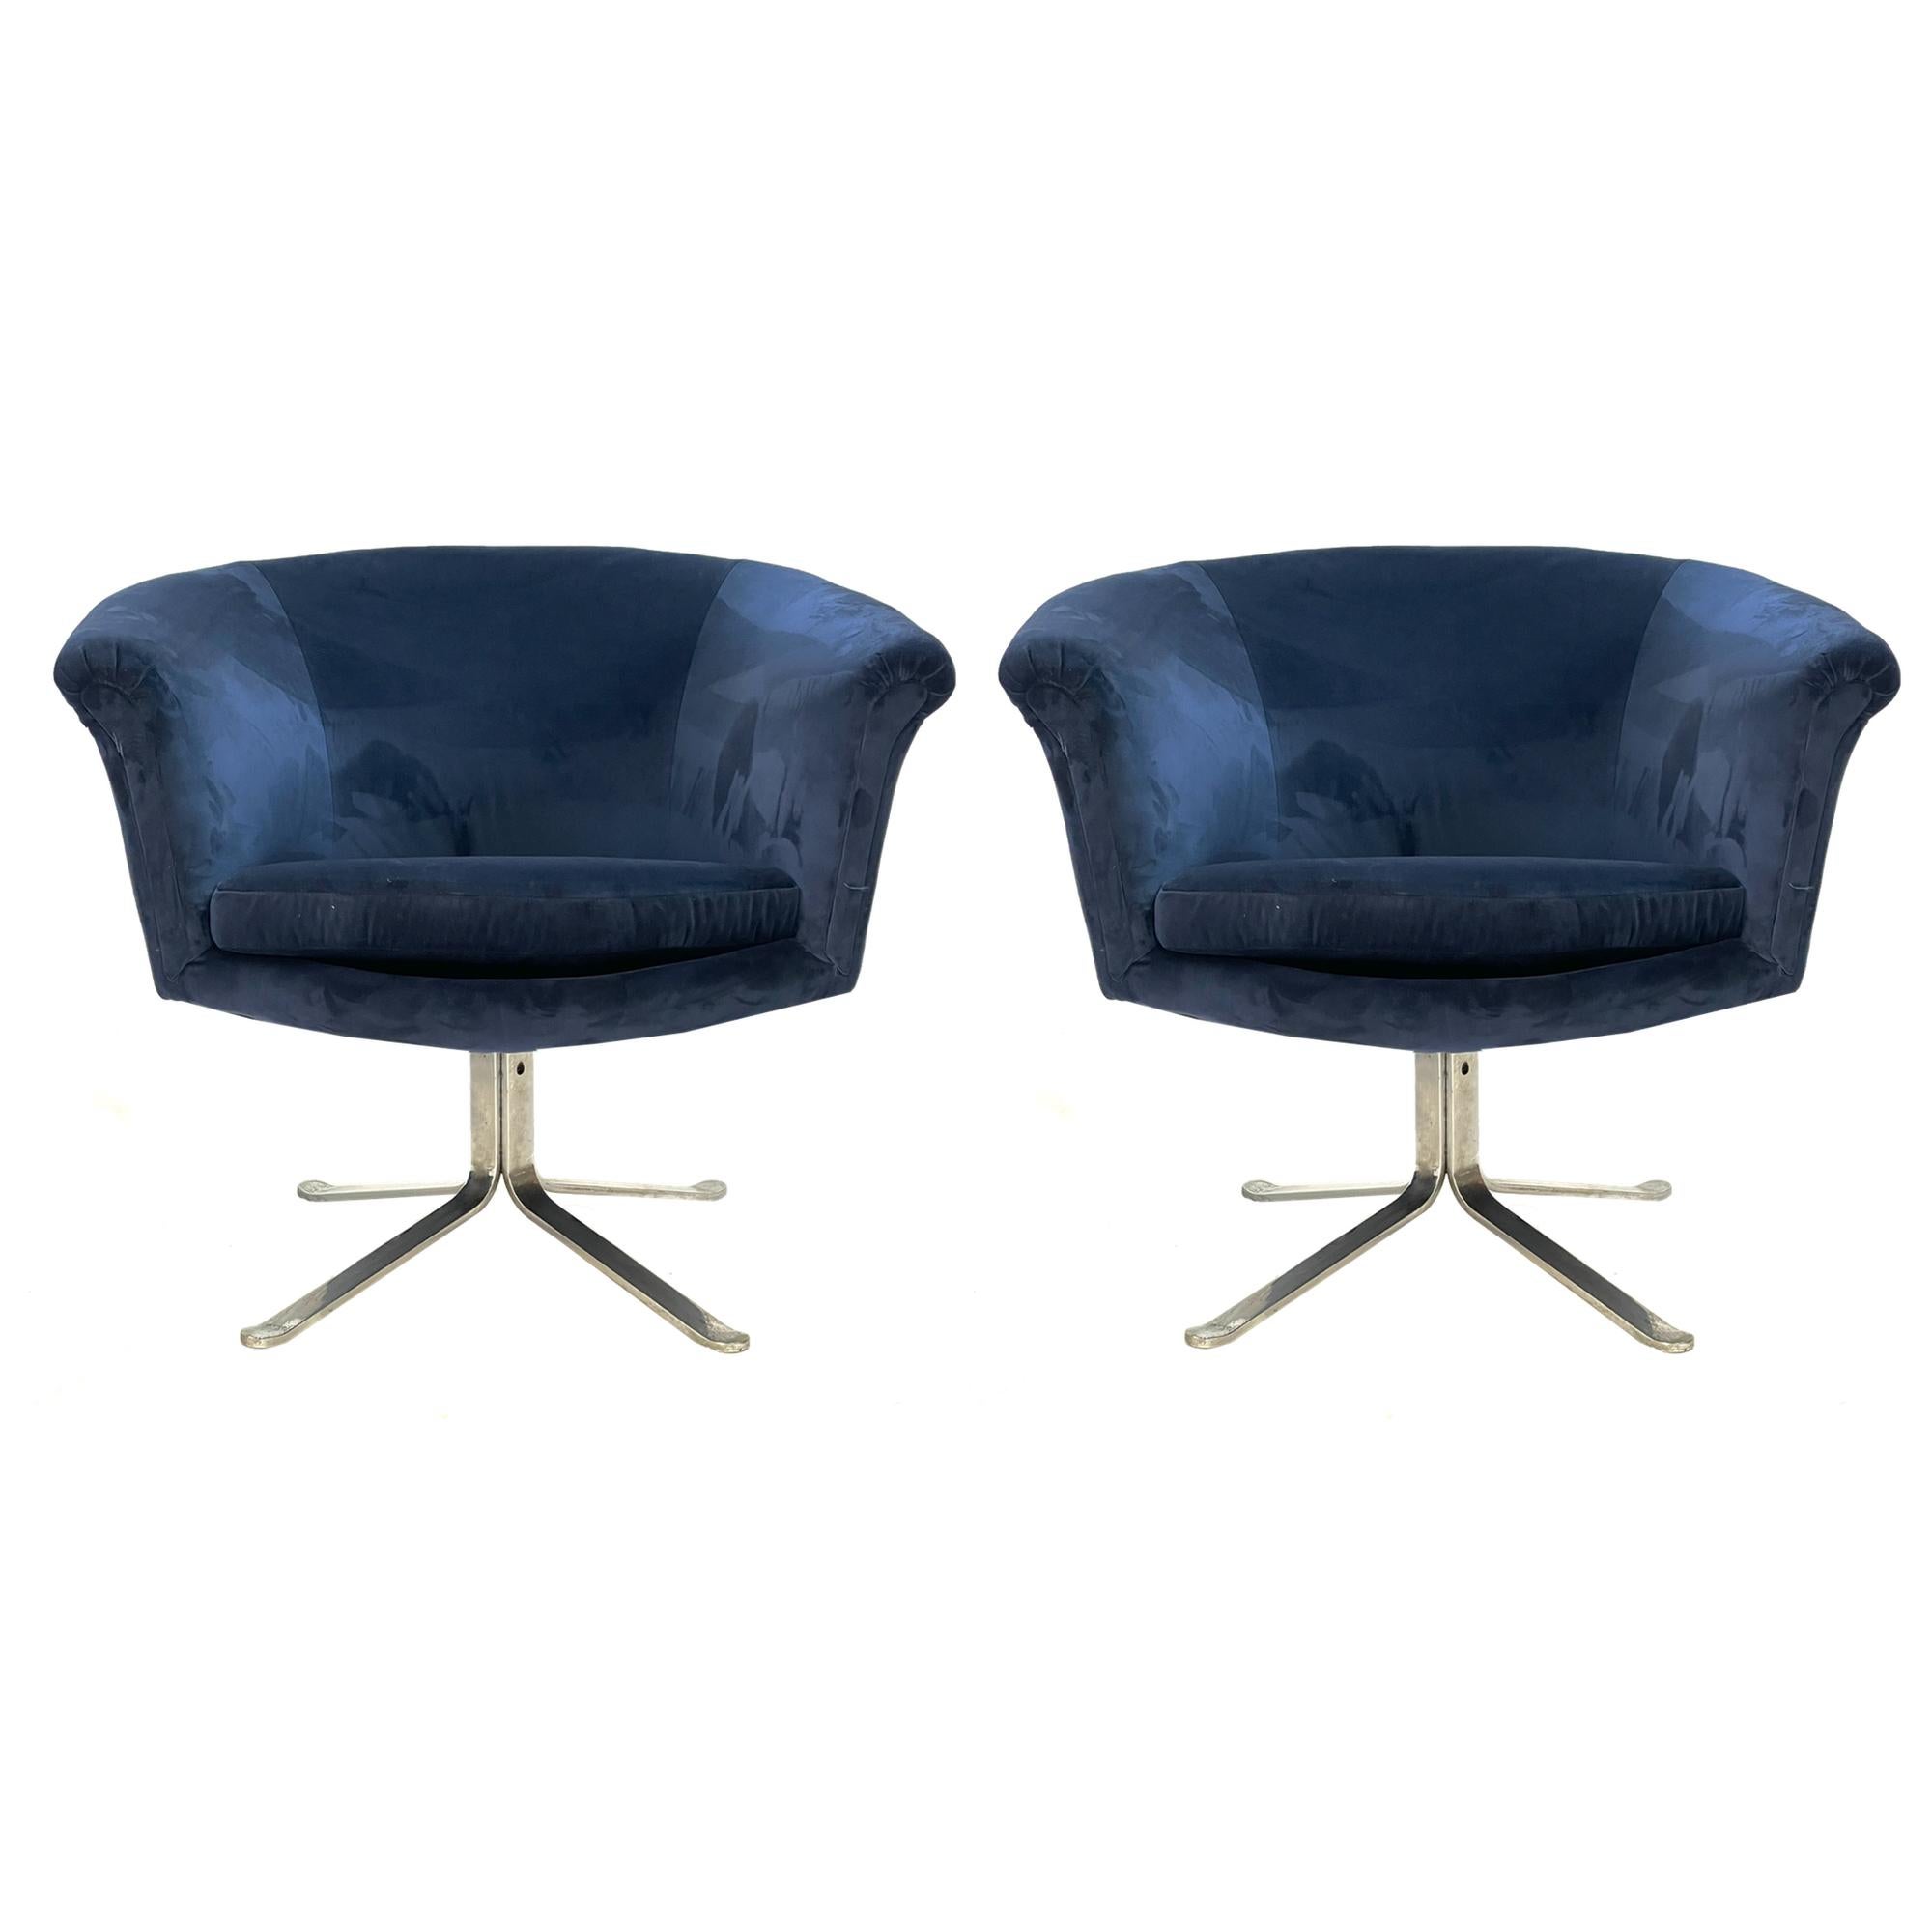 Stunning pair of deep blue velvet armchairs.  The steel x base frames are absolutely stunning. Solid, lovely chairs in good condition. Ready for use.